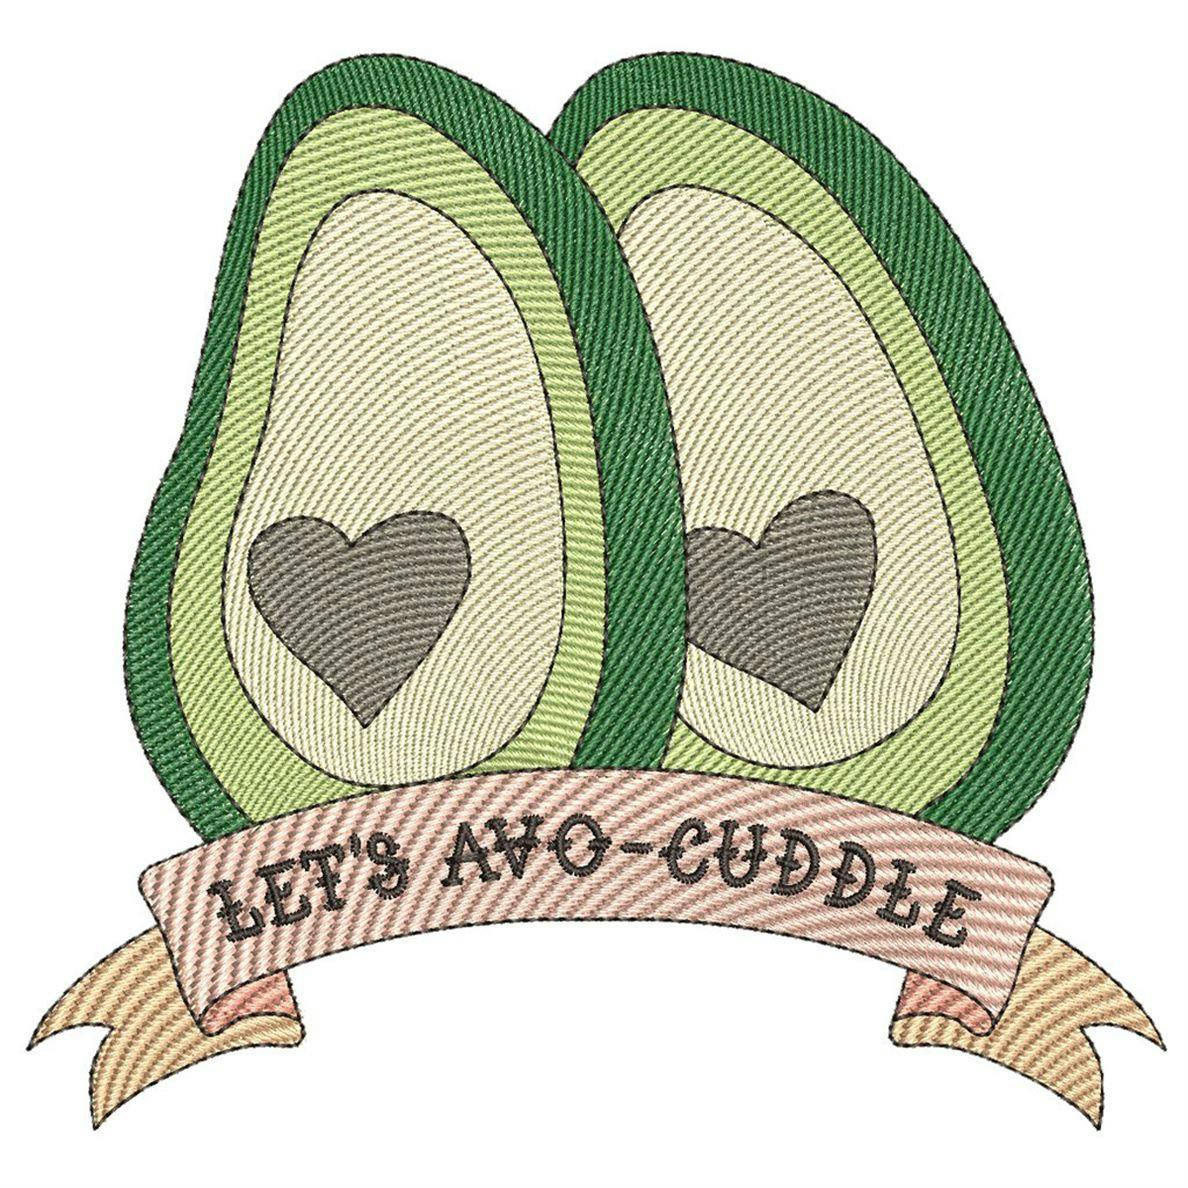 Avocado design from Inked -- Eat your Veggies CD